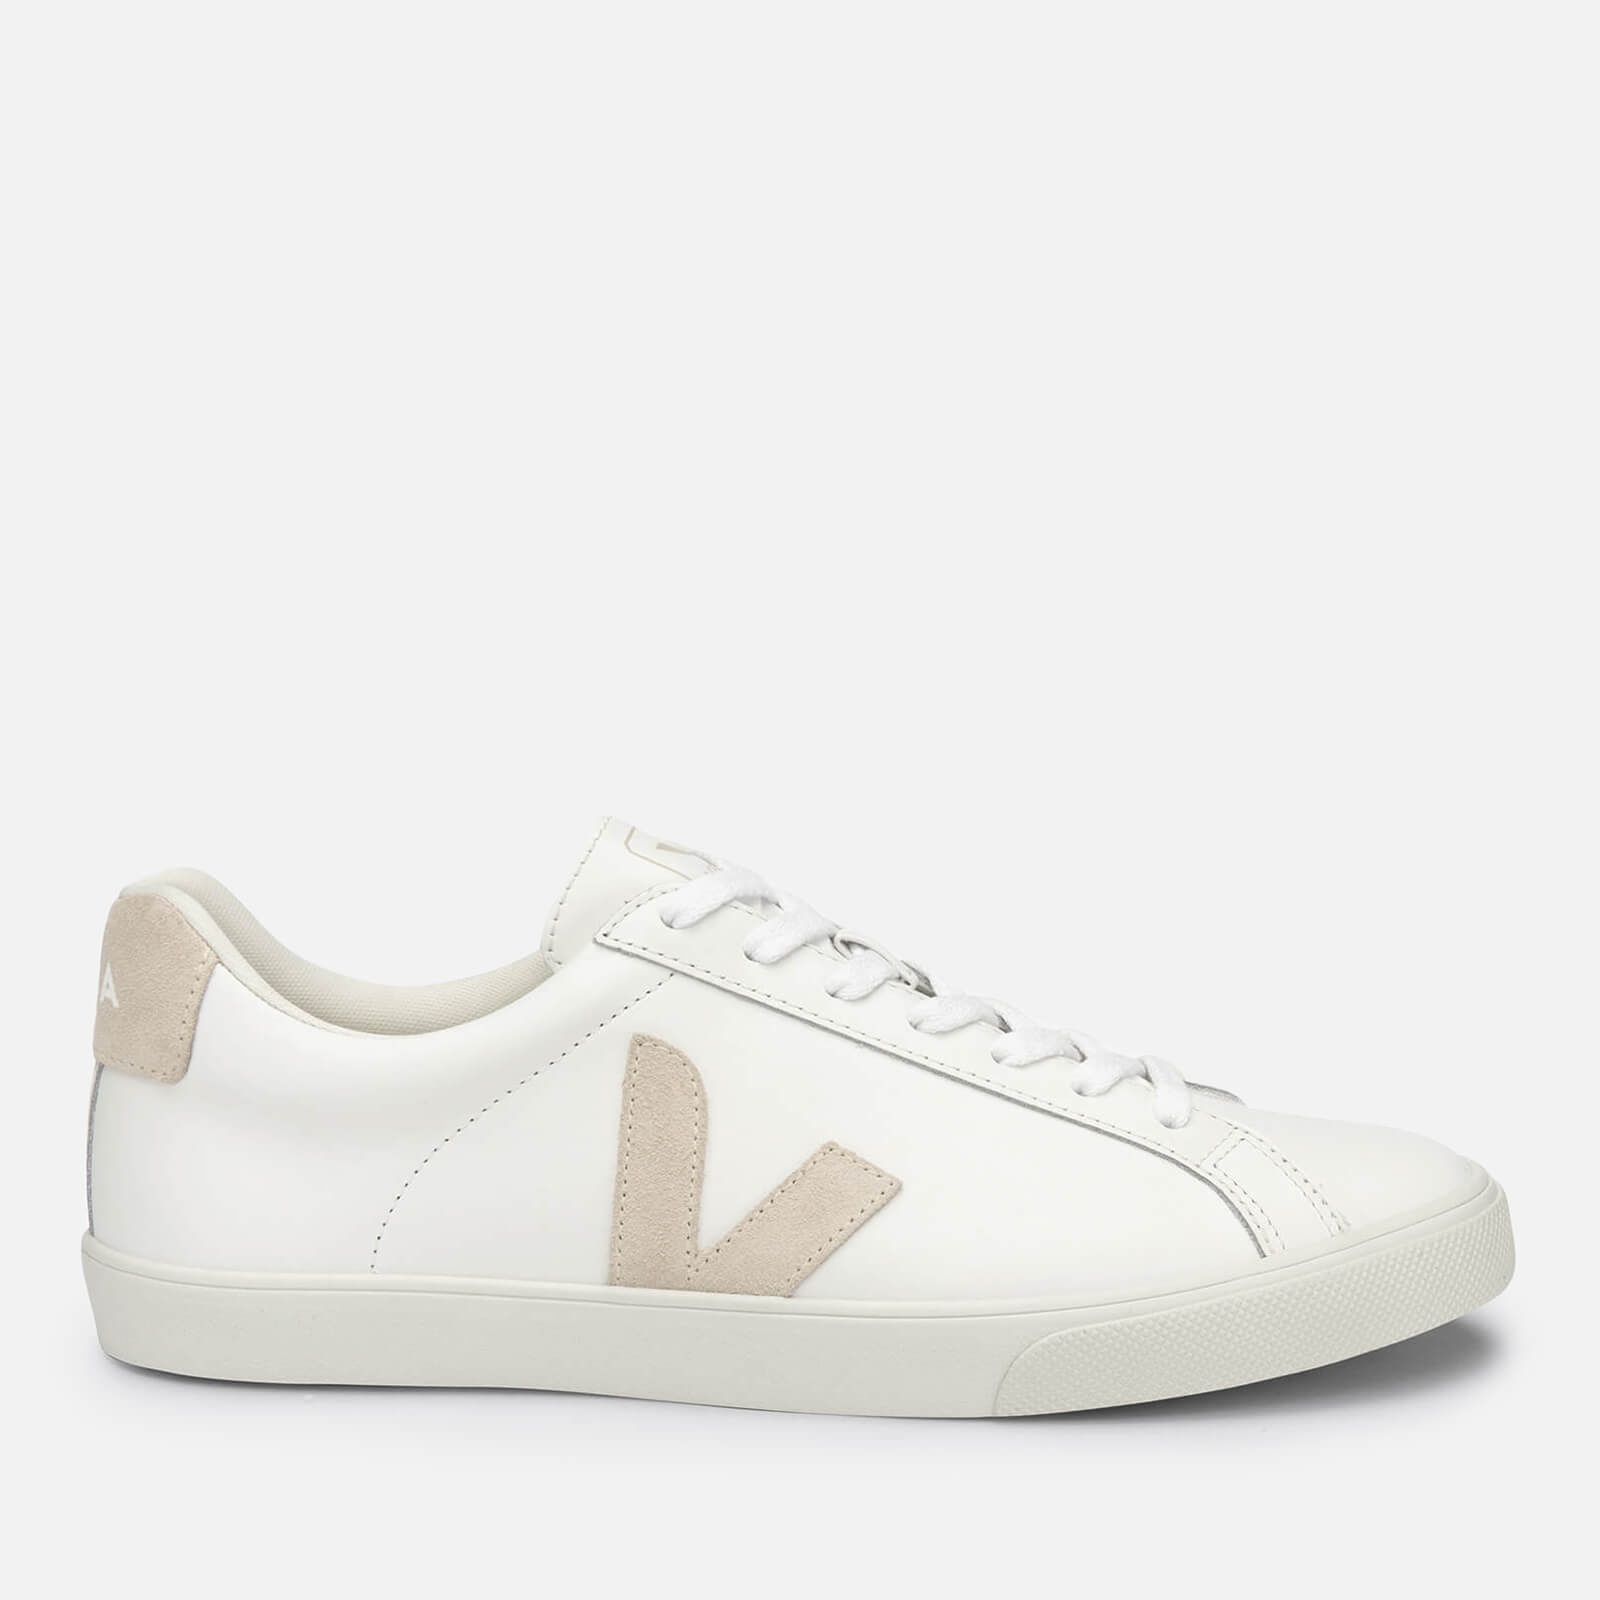 Veja Women's Esplar Leather Low Top Trainers - Extra White/Sable - UK 4